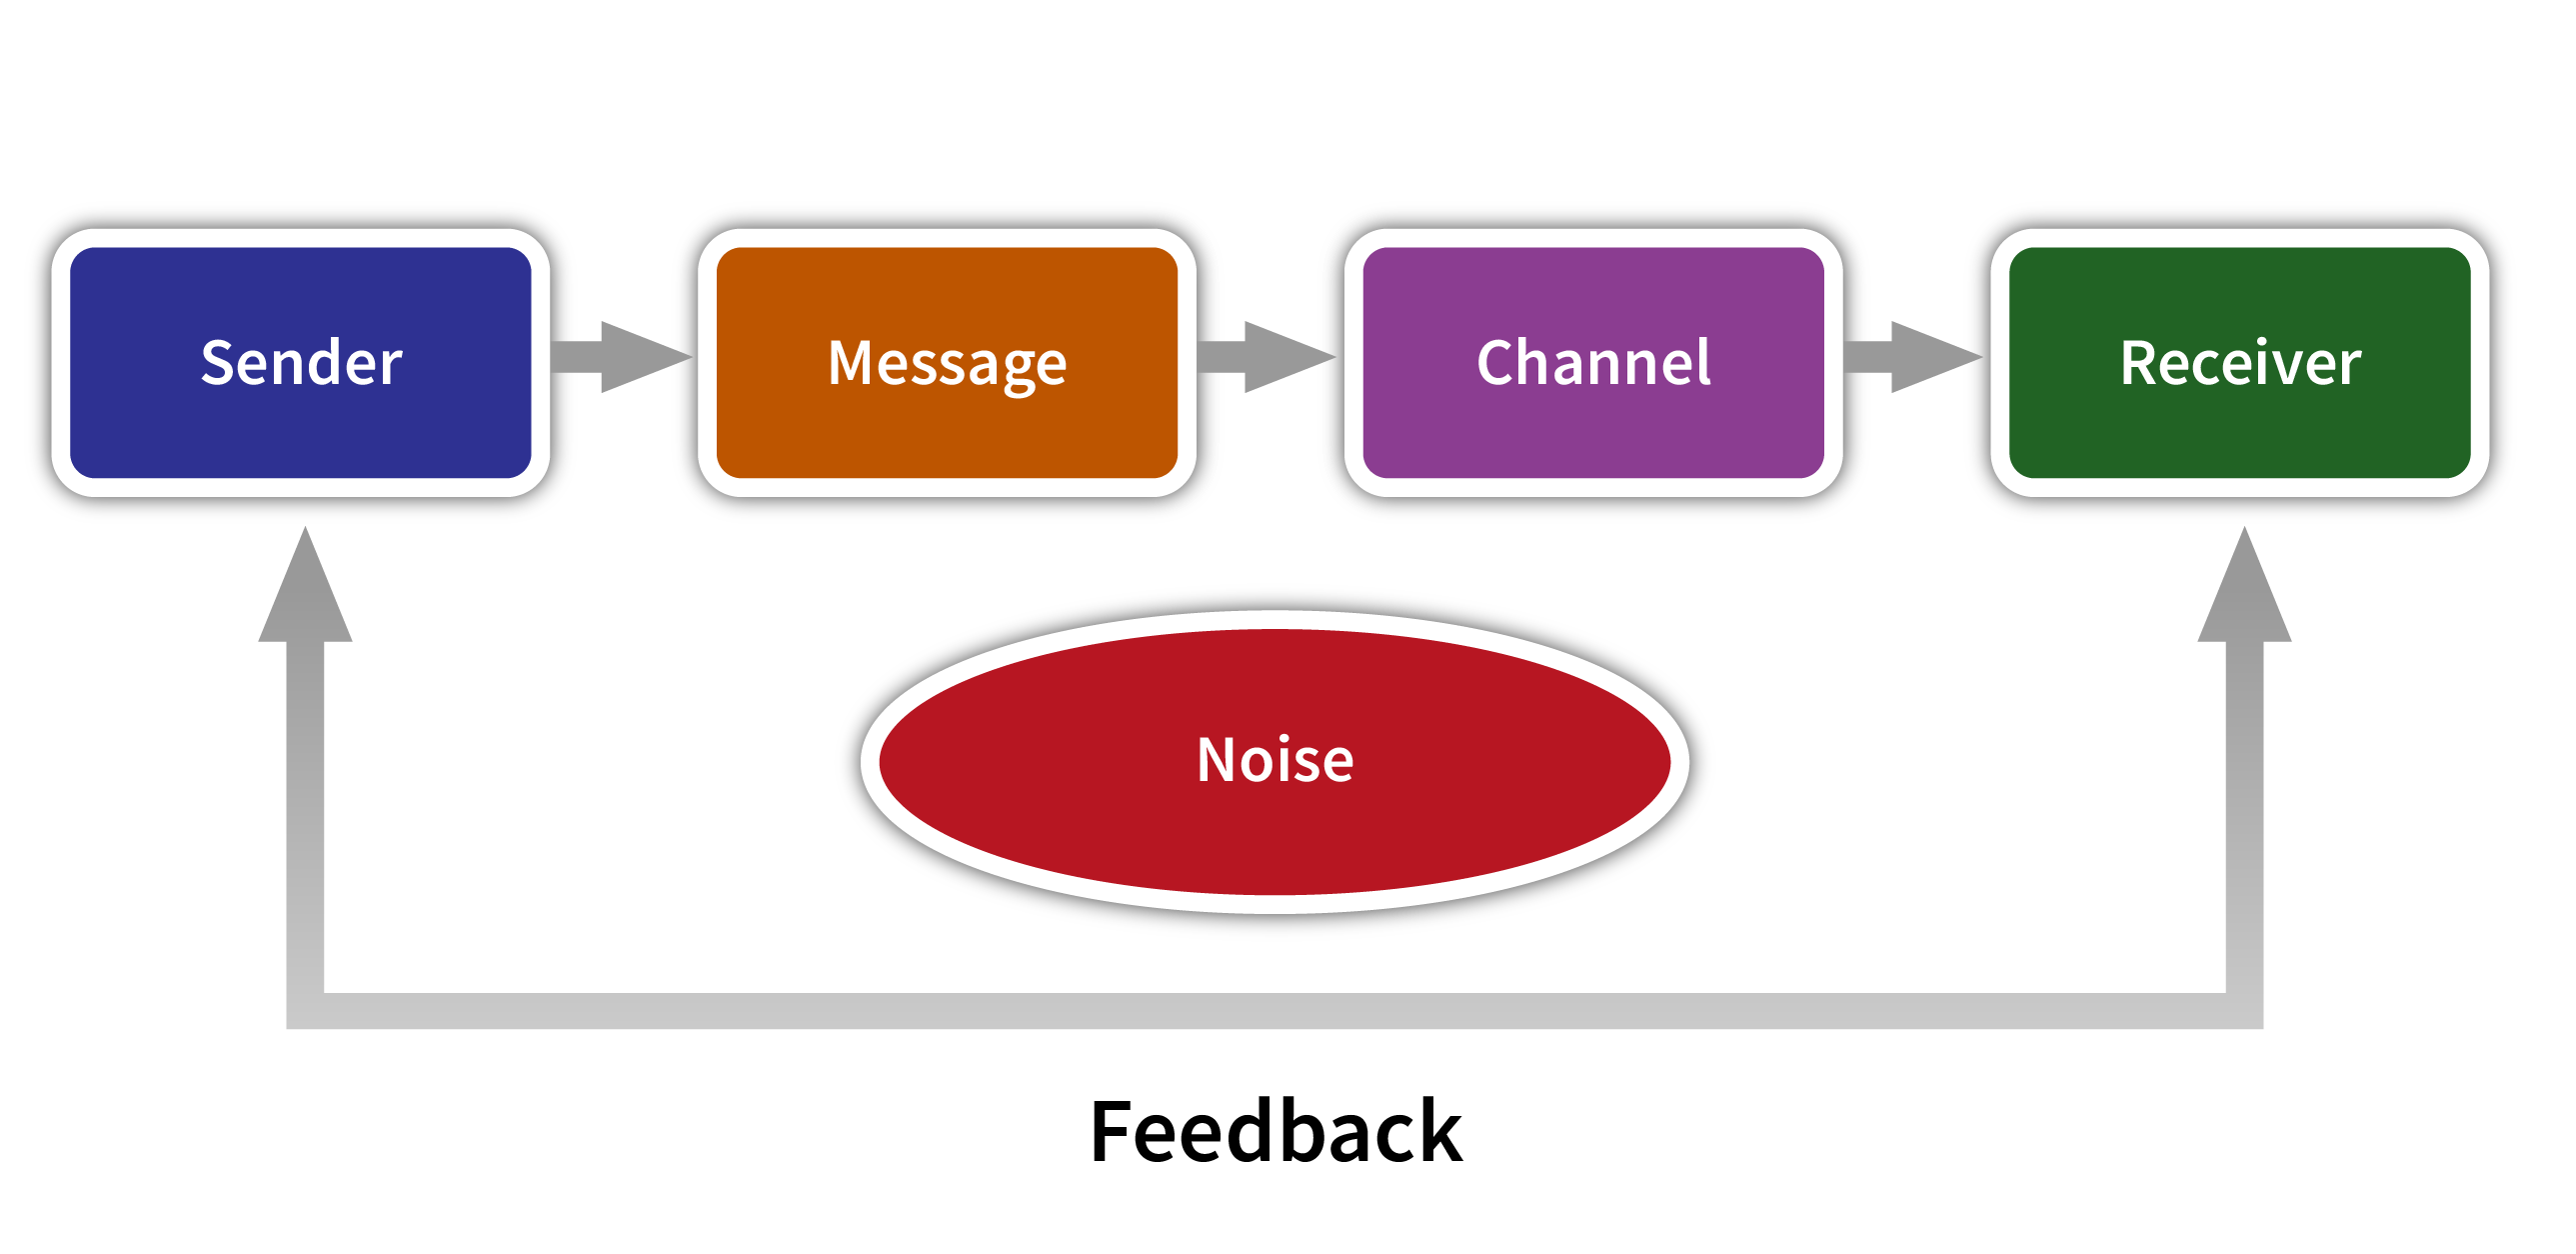 Traditional Communication Process showing Sender and Receiver sending feedback to each other. Sender points to Message, Message points to Channel, and Channel points to Receiver.